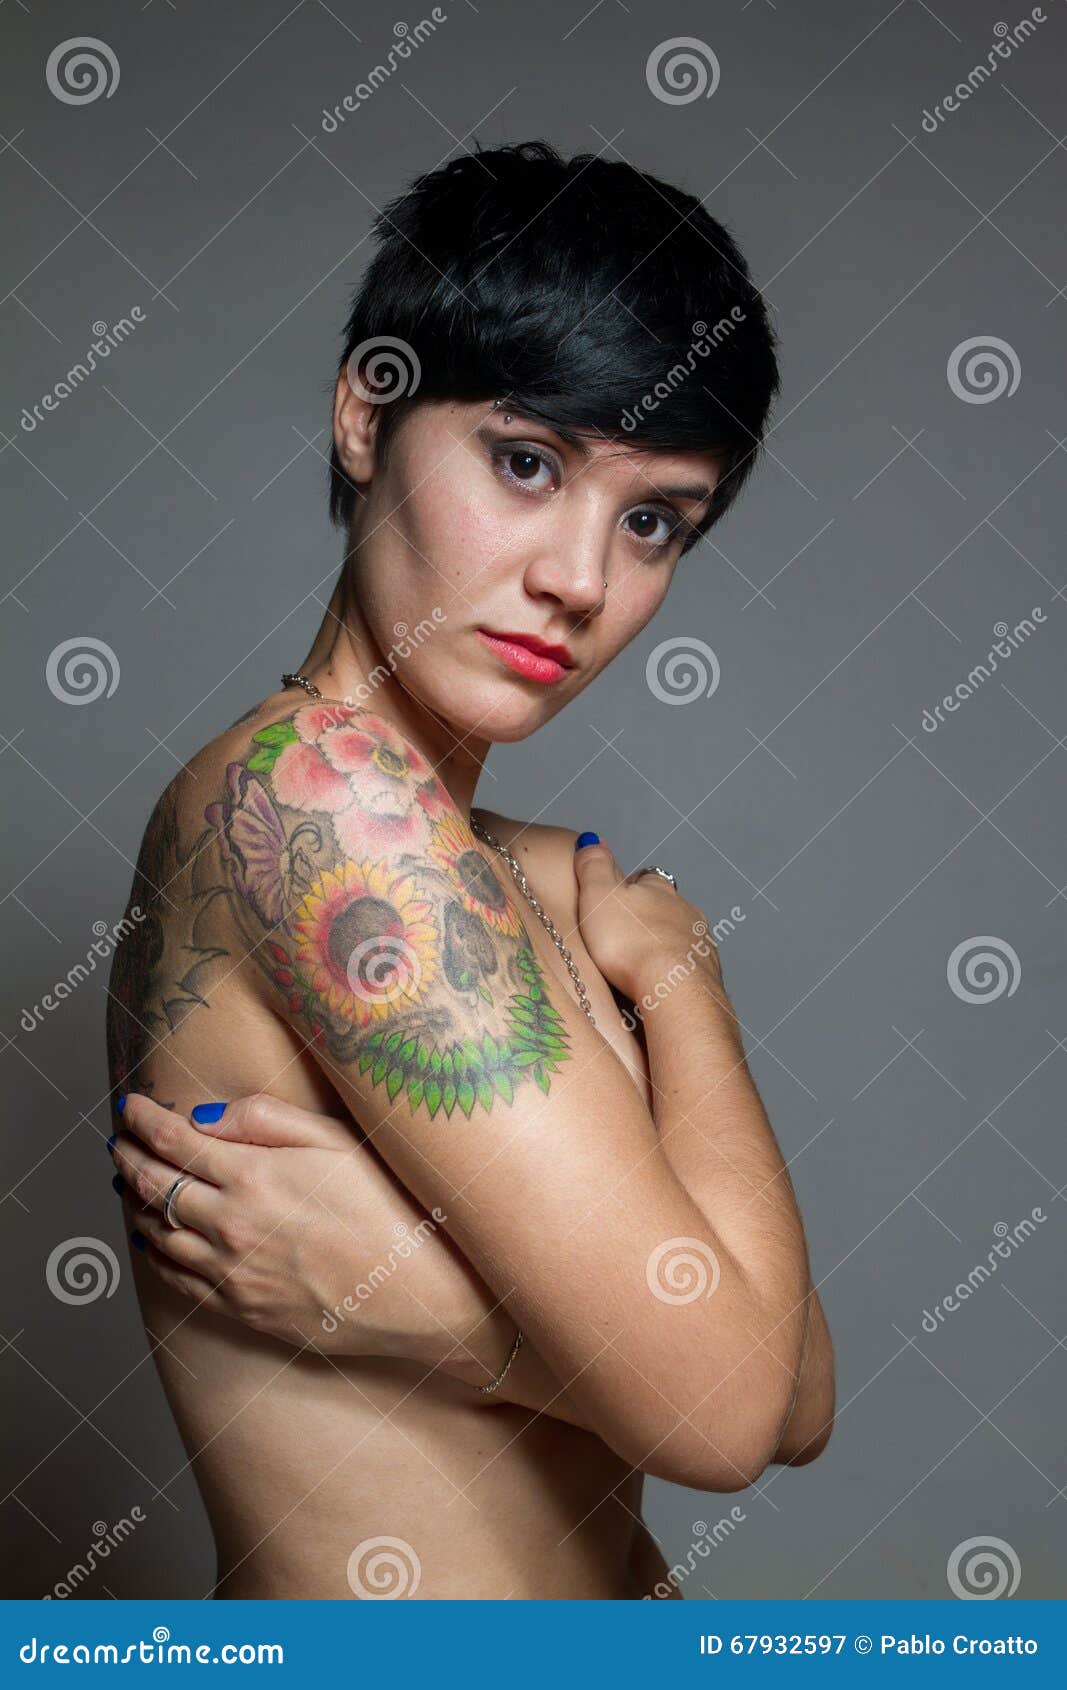 Short Haired Nude Women alive com